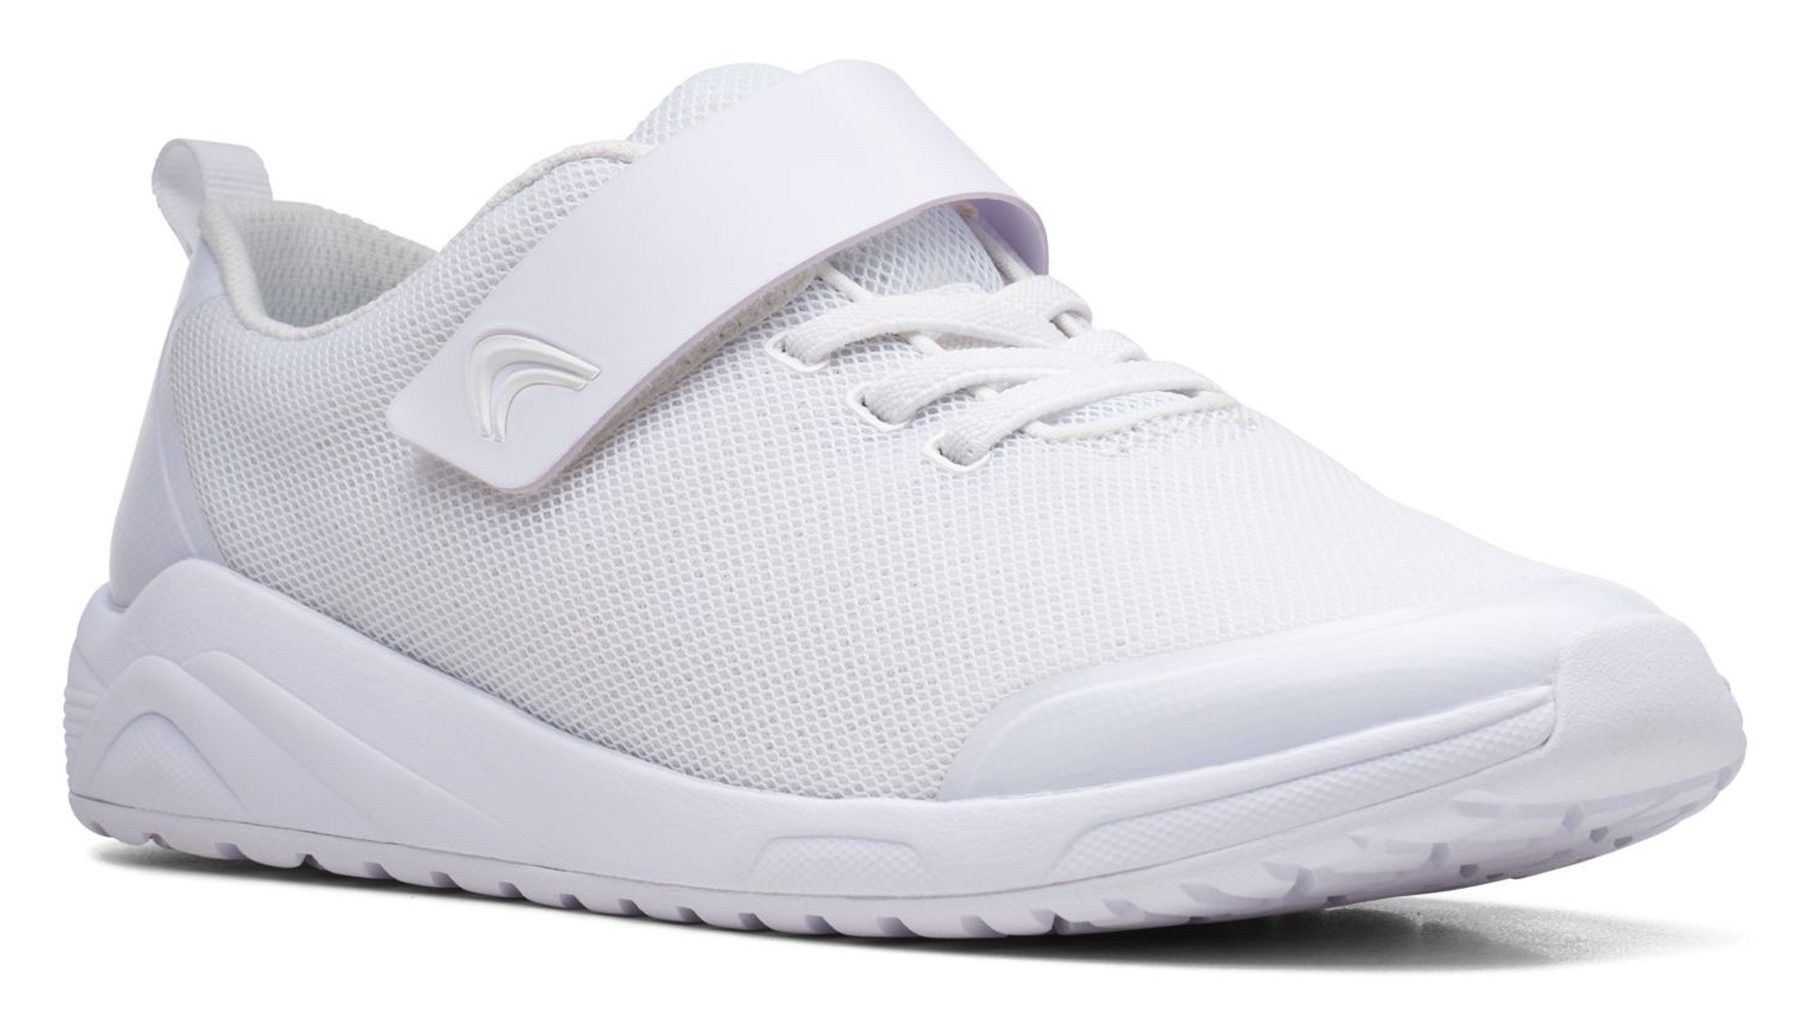 Clarks Aeon Pace Youth White 26168605 - Boys Trainers - Humphries Shoes